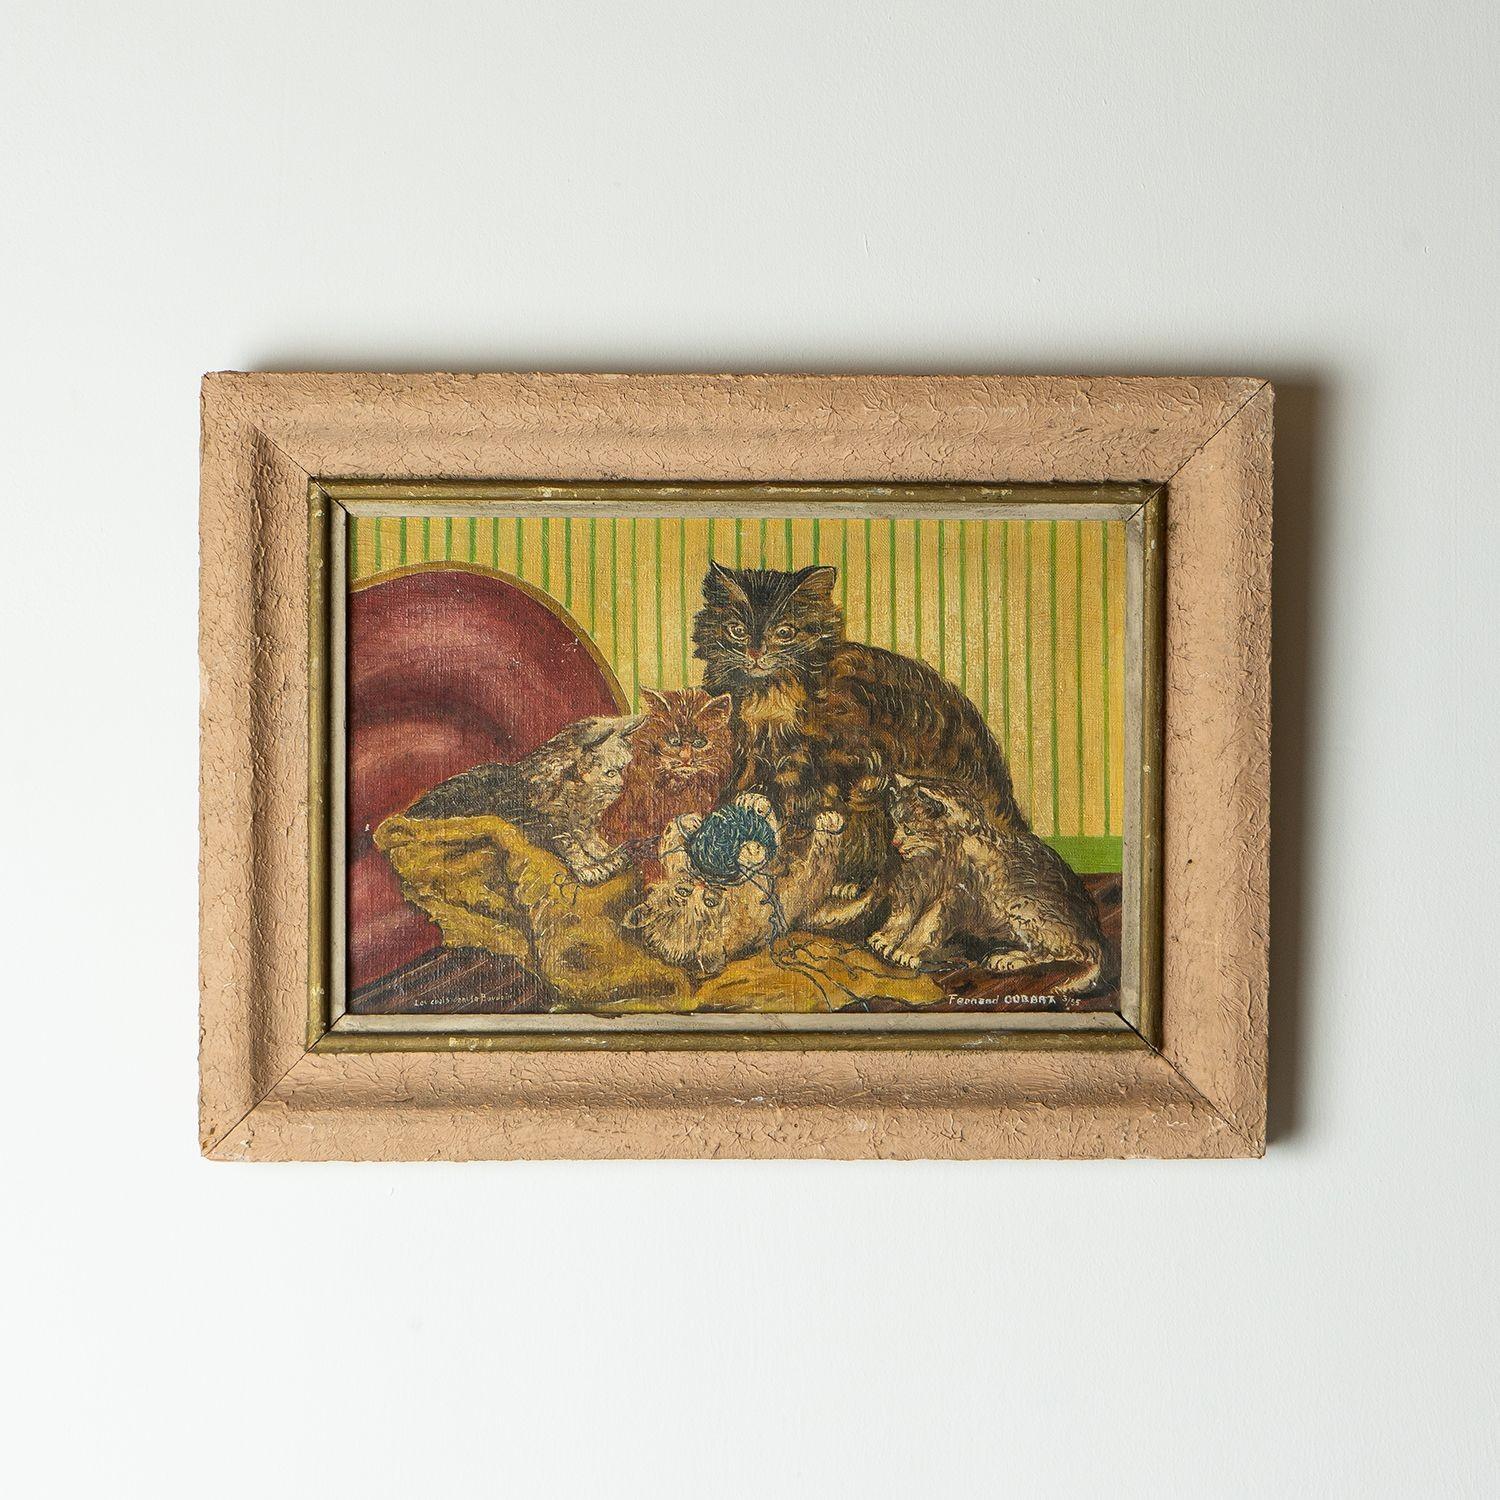 Antique Original Oil on Canvas Painting Depicting Cats Playing by Fernand

A mother cat and four kittens playing with a ball of wool sat on a bed with a pink velvet headboard and striped wallpaper in the background.

Painted very much in a naive